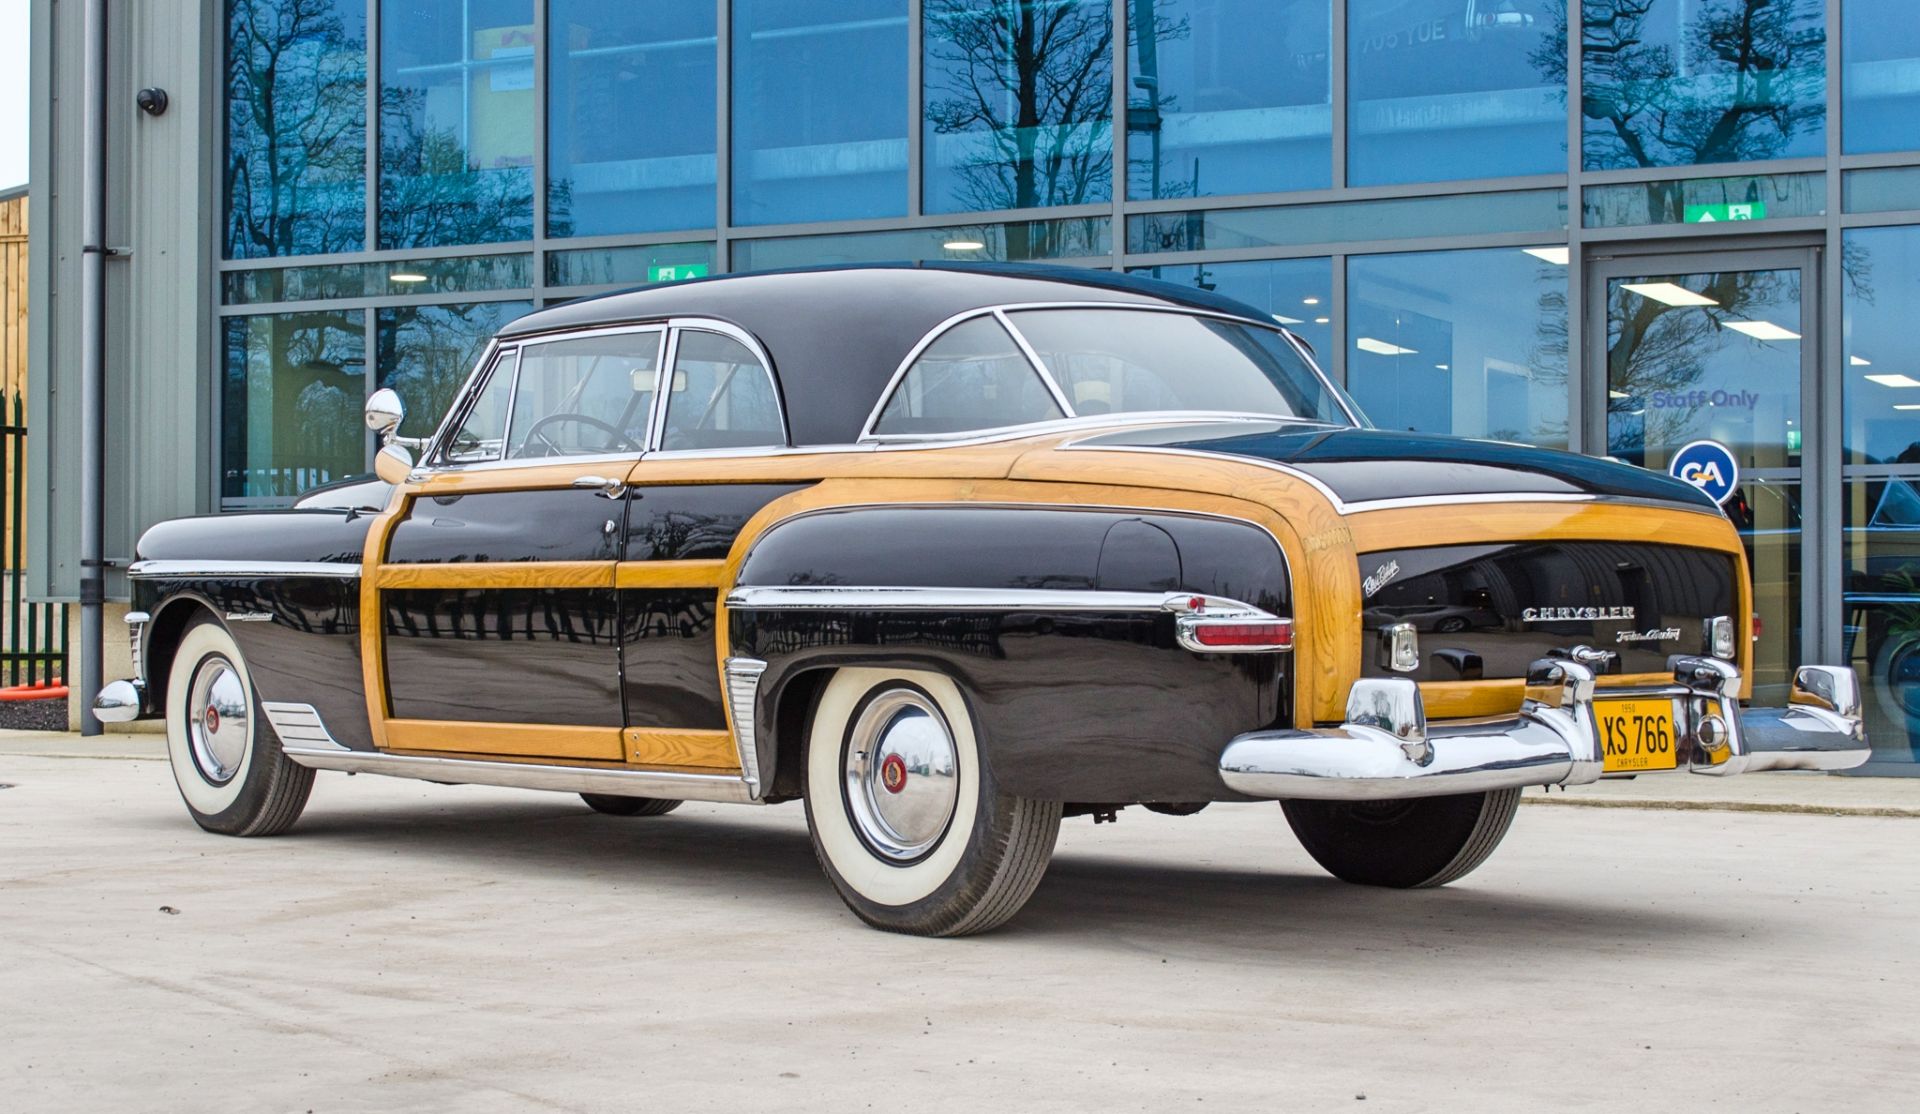 1950 Chrysler Newport Town and Country 5300cc 2 door Coupe - Image 7 of 62